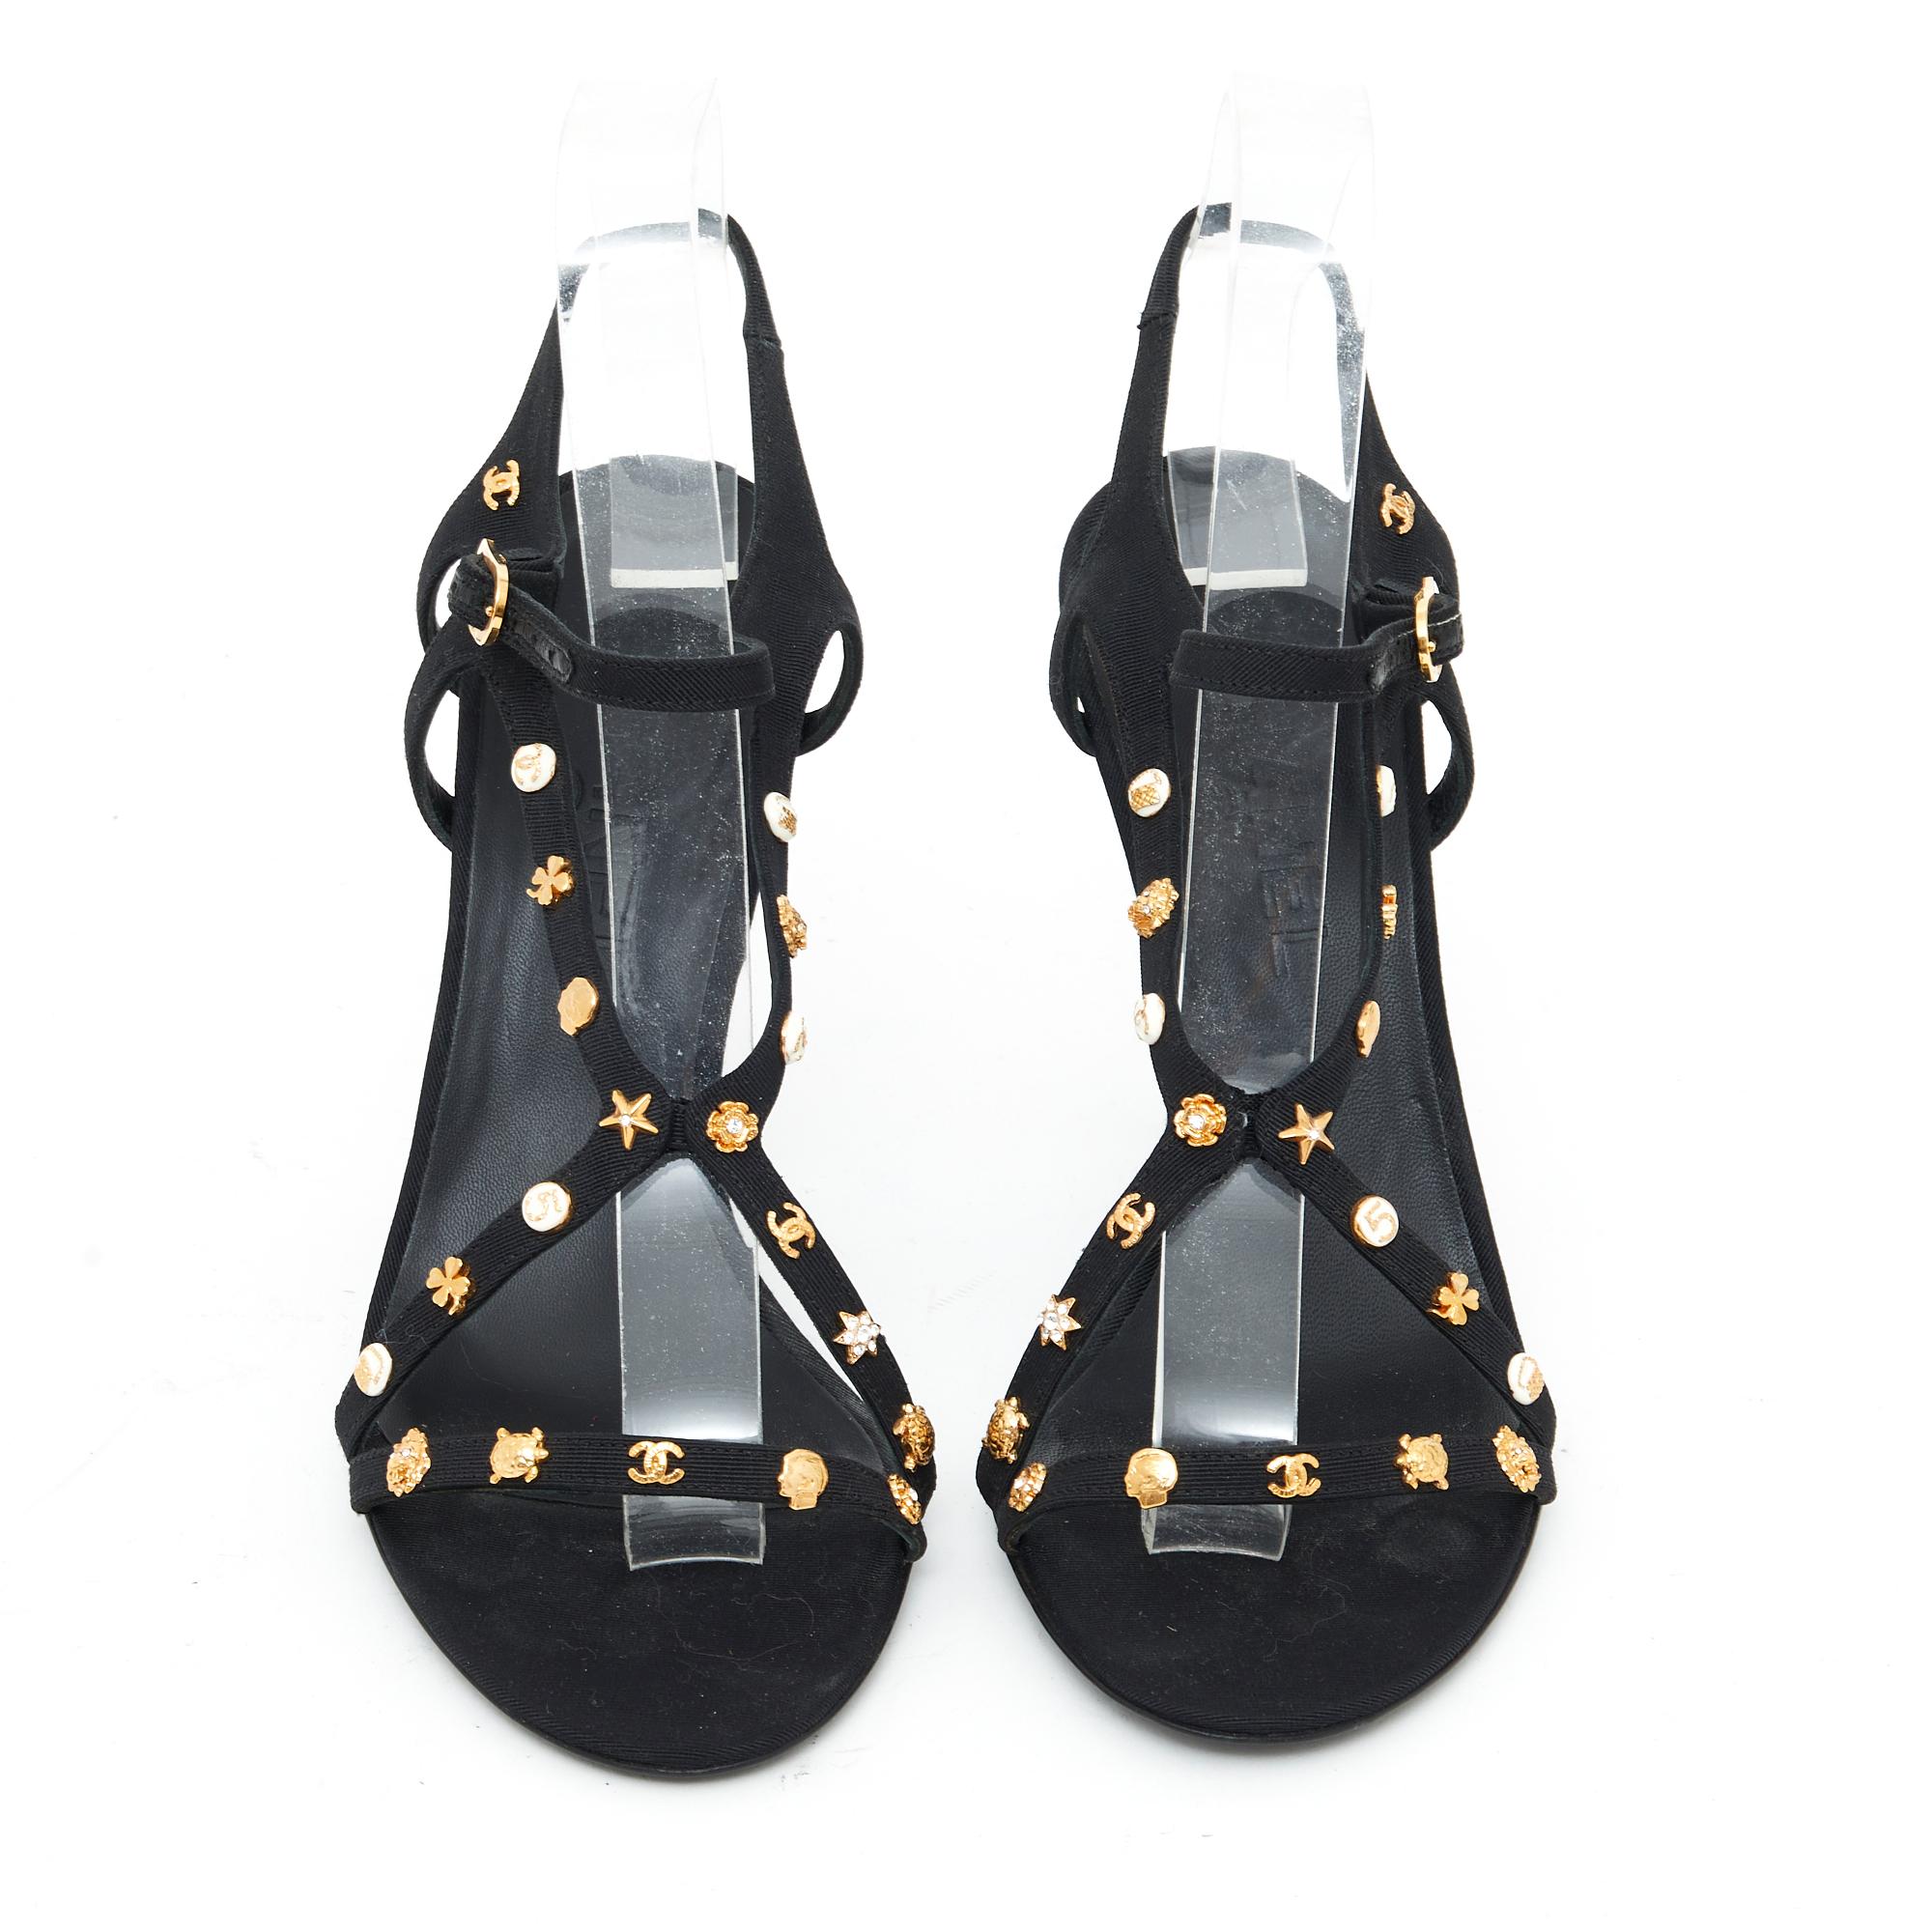 Chanel sandals composed of thin black canvas straps (lined with leather) adorned with mini Chanel icons in gold metal and rhinestones or ivory enamel for some: camellia, Coco, CC, 5, star, ... Size 37.5FR, heel 10.5 cm , insole 23.7 cm. The sandals